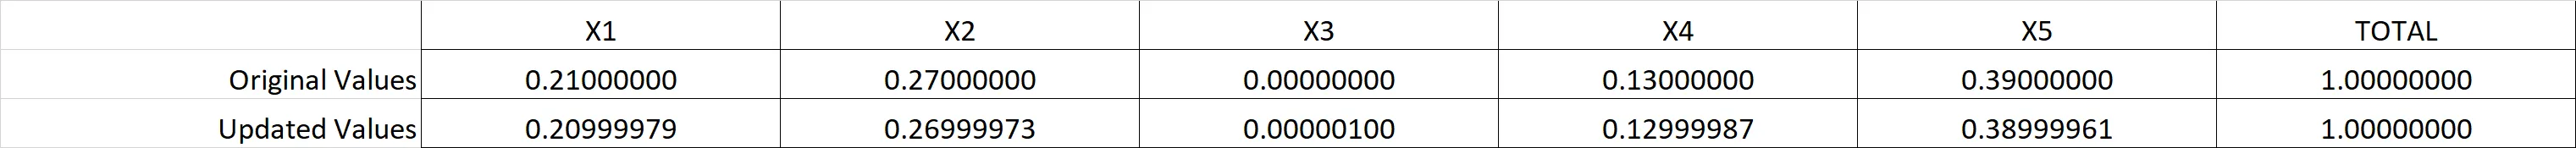 Table showing updated values of X1, X2, X4 and X5 when a small value is added to X3